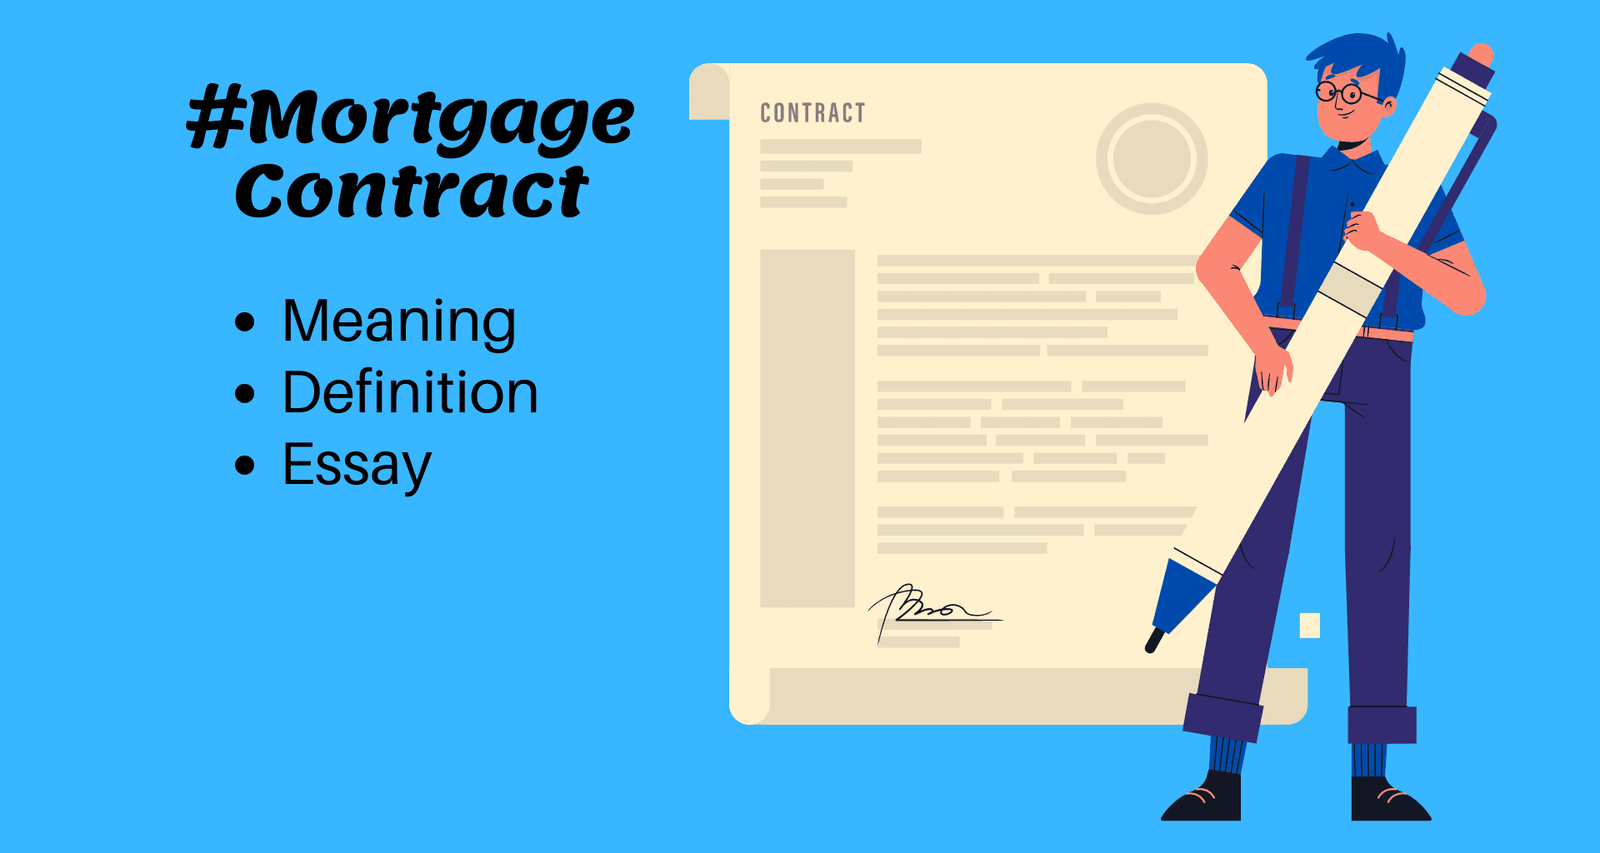 What do the Means of Mortgage Contract Image